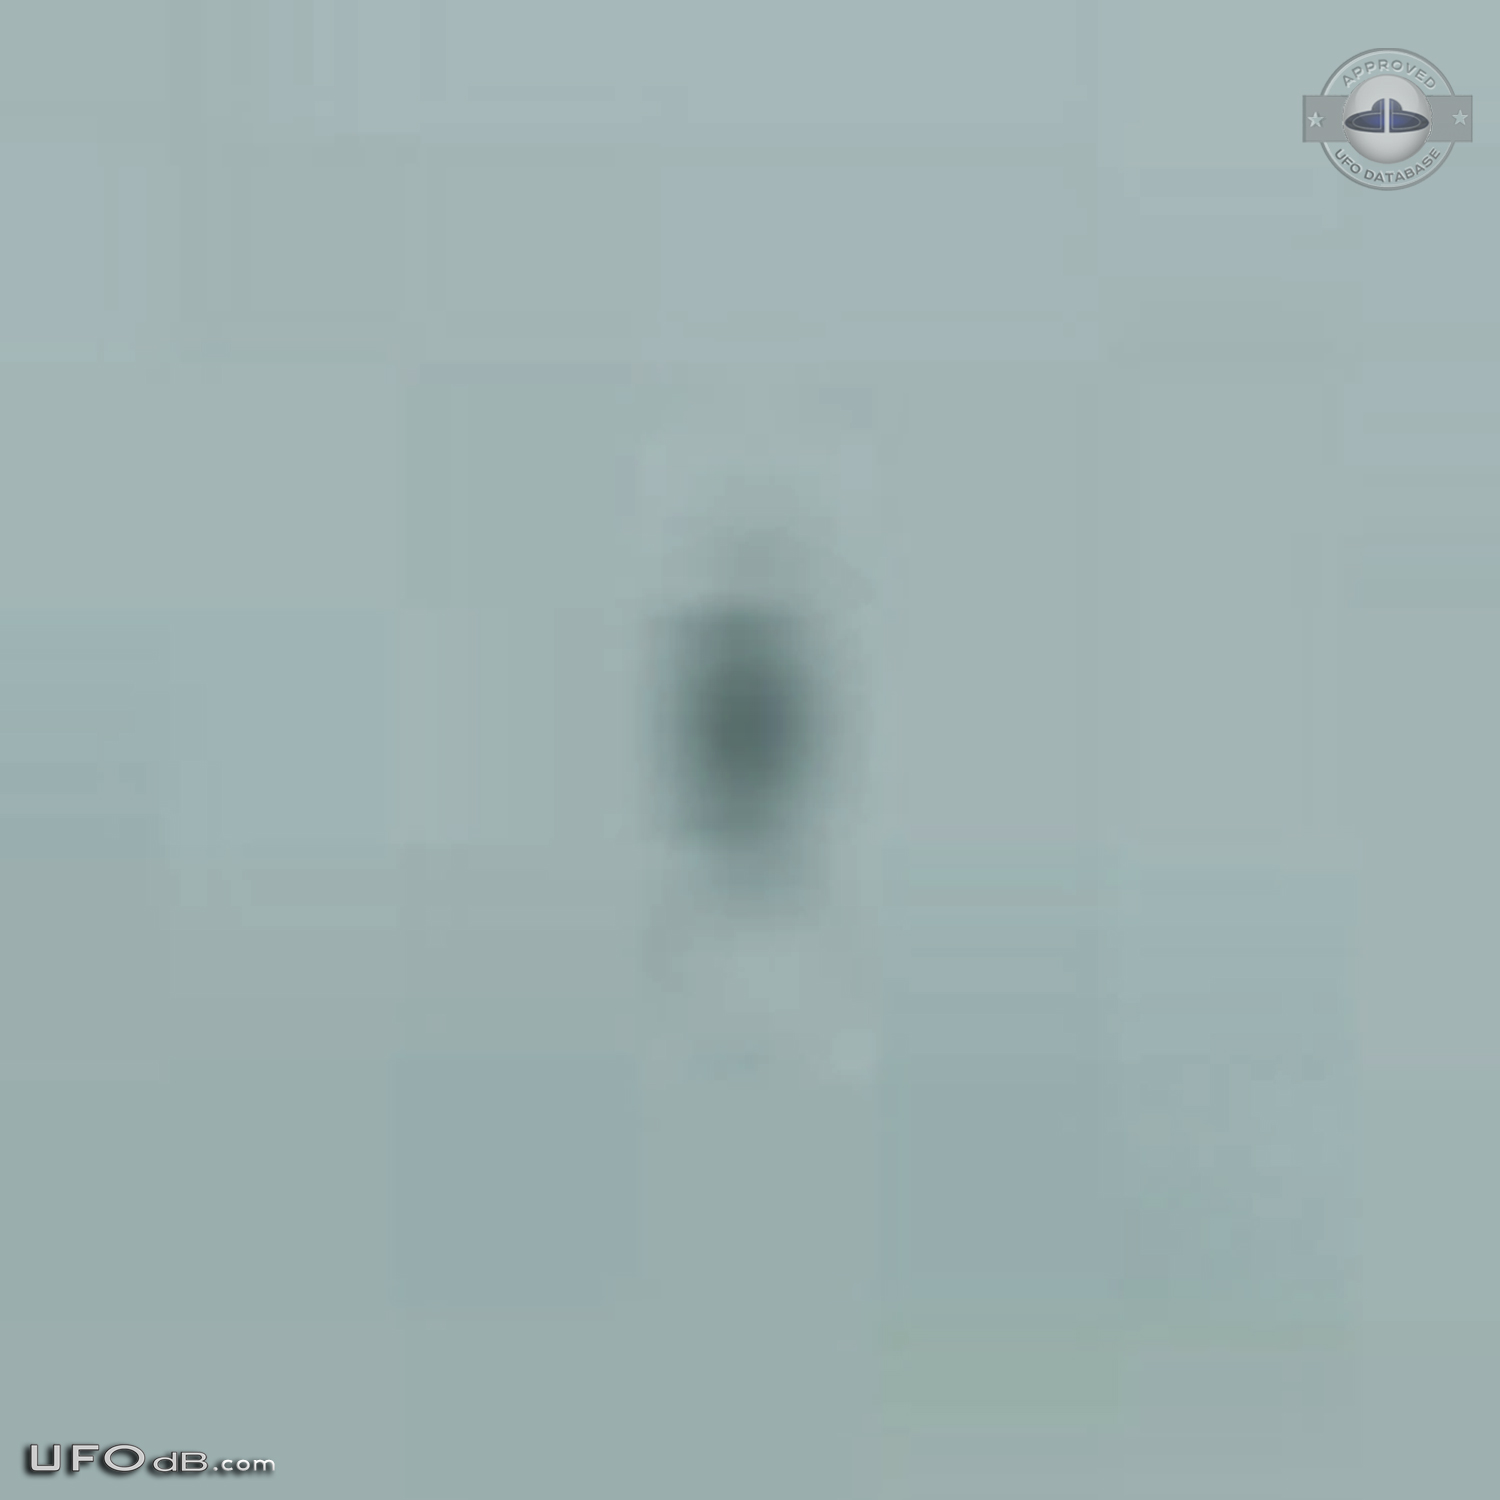 Probe ufo sighting caught on picture in Tokyo, Japan - January 2012 UFO Picture #410-6